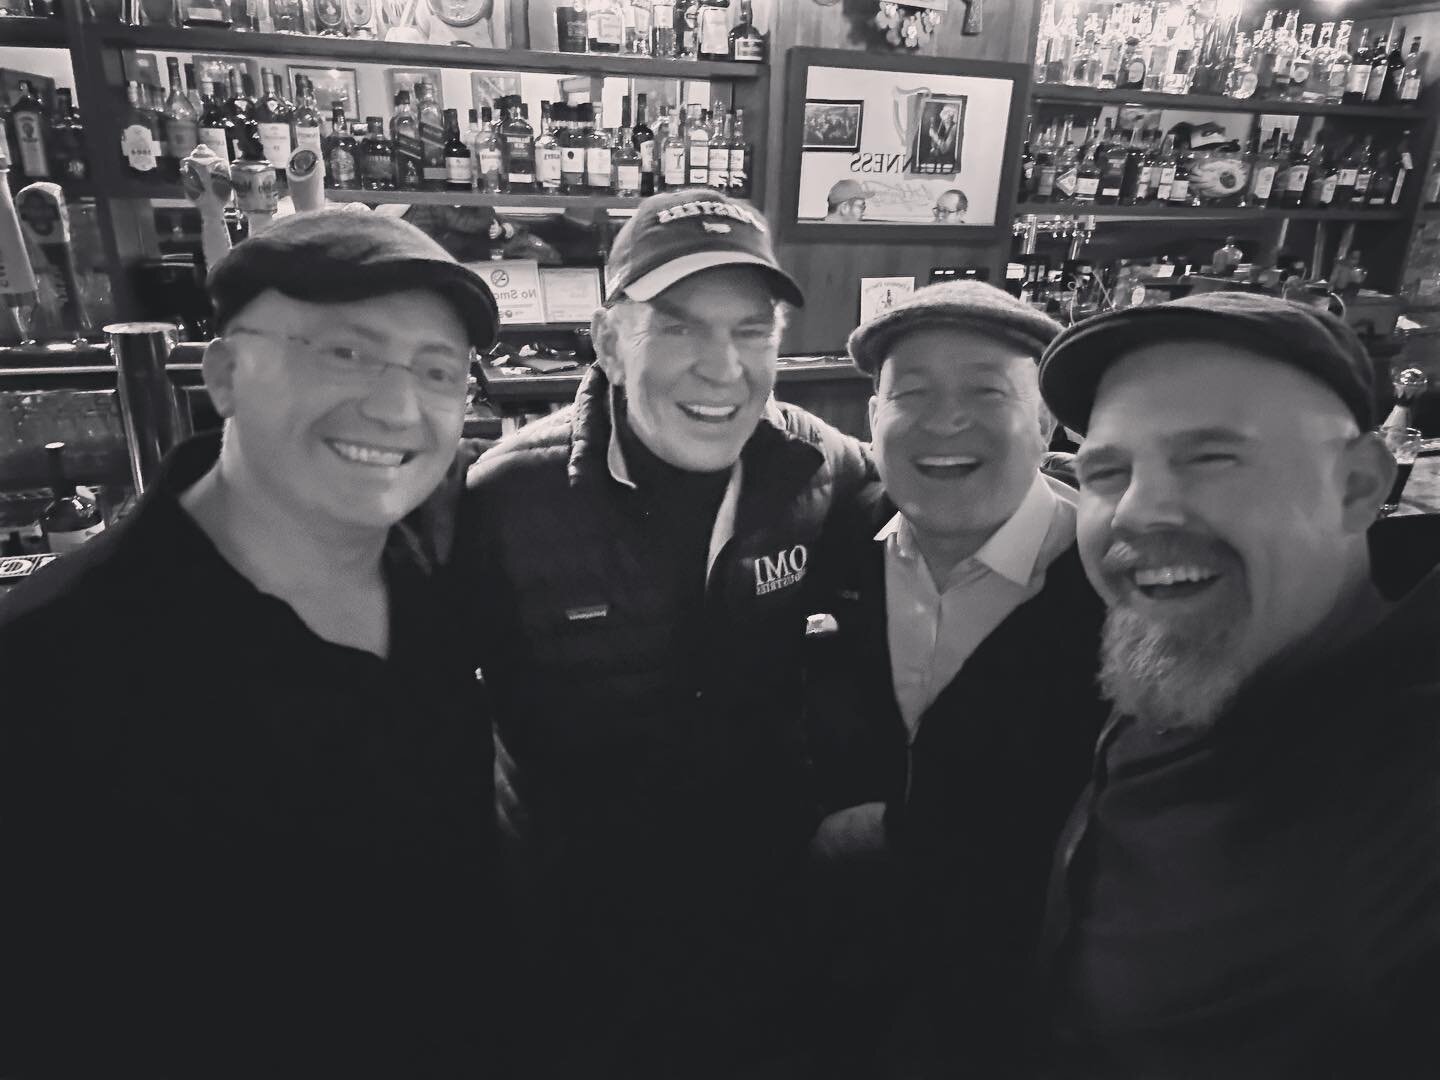 What a fun night it was at @celticcrossingchicago last night - ended up playing way past 9pm and enjoyed the craic with these fine gentleman and others at the bar! Paddy (far left) and Declan (next to me) have the most incredible voices - it was such